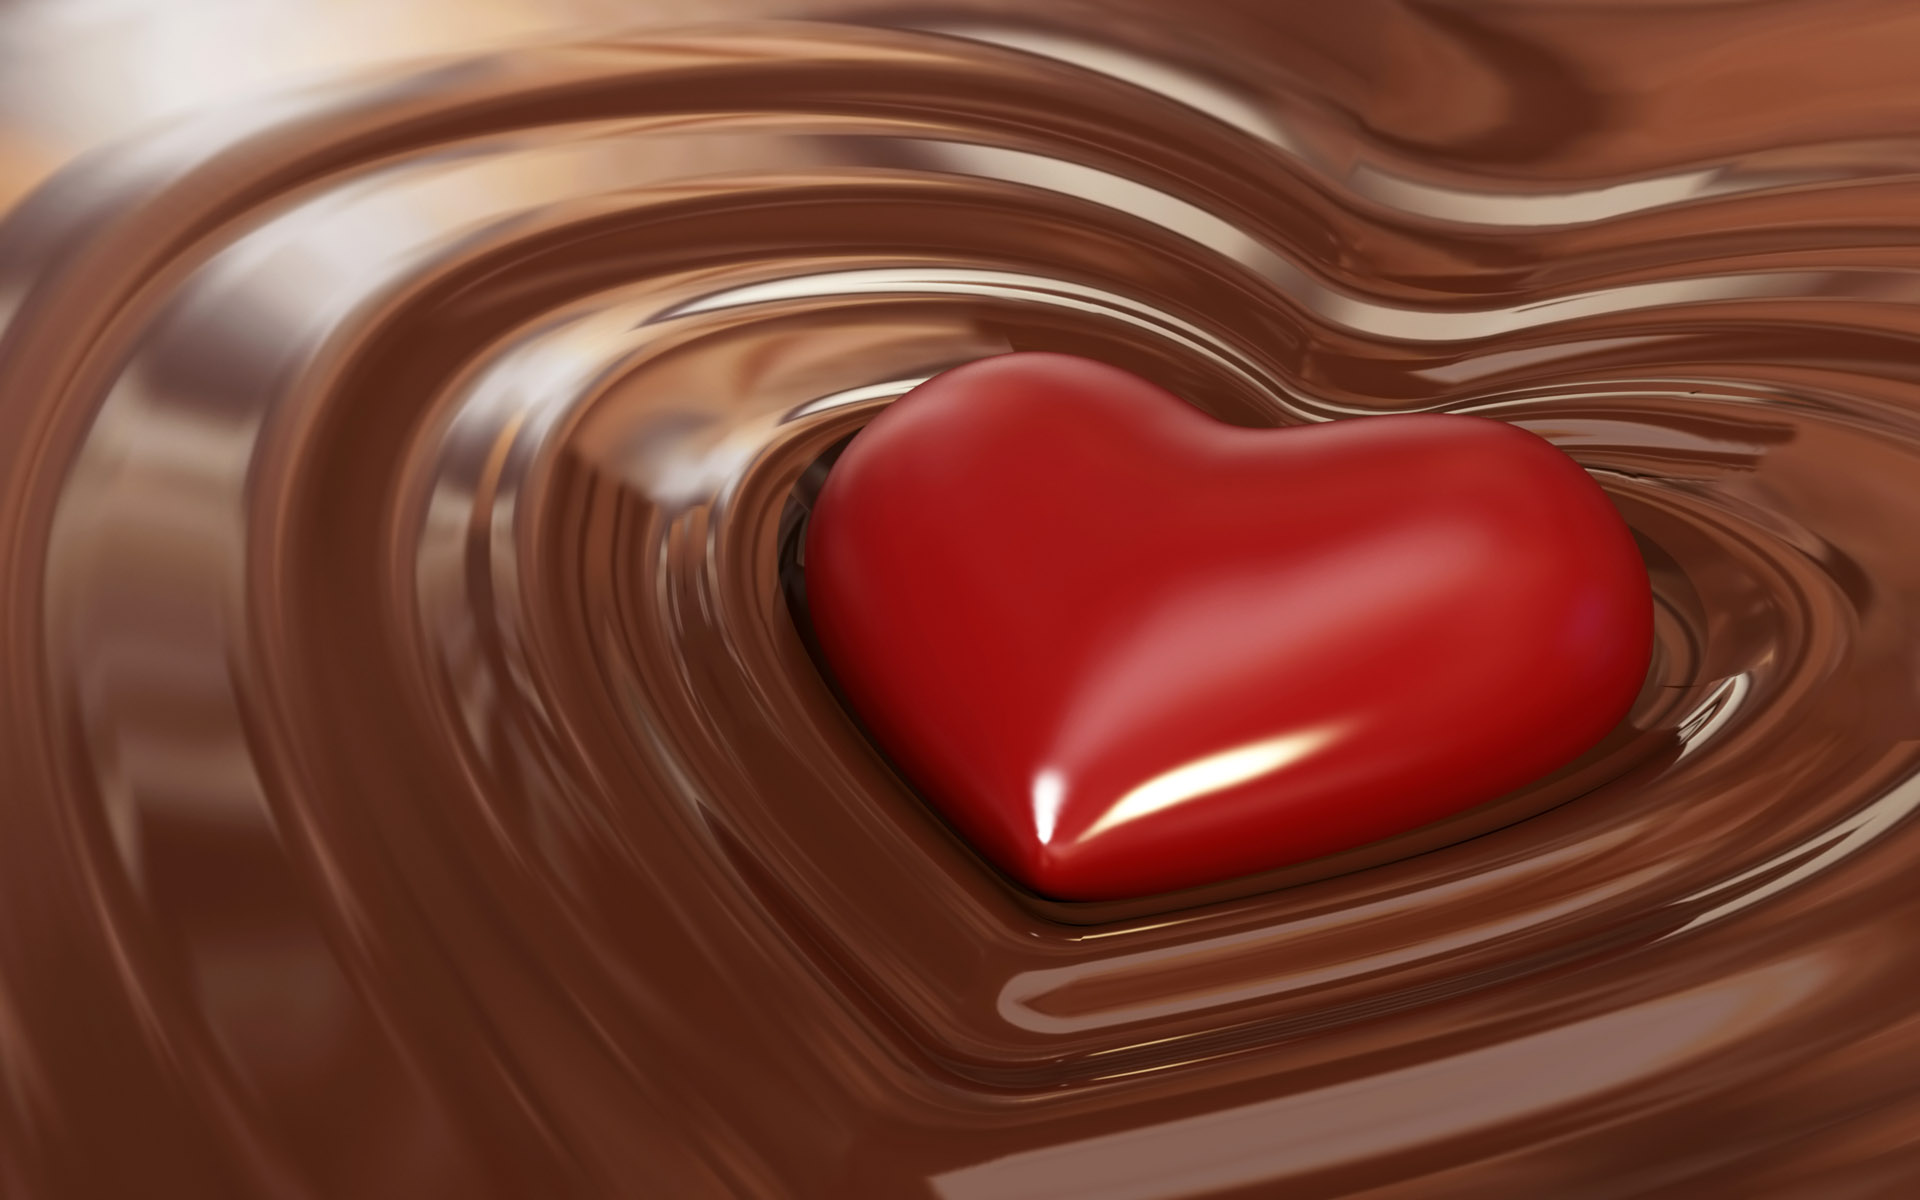 TRENDING: Women give men Valentine's Day chocolates made with their ...